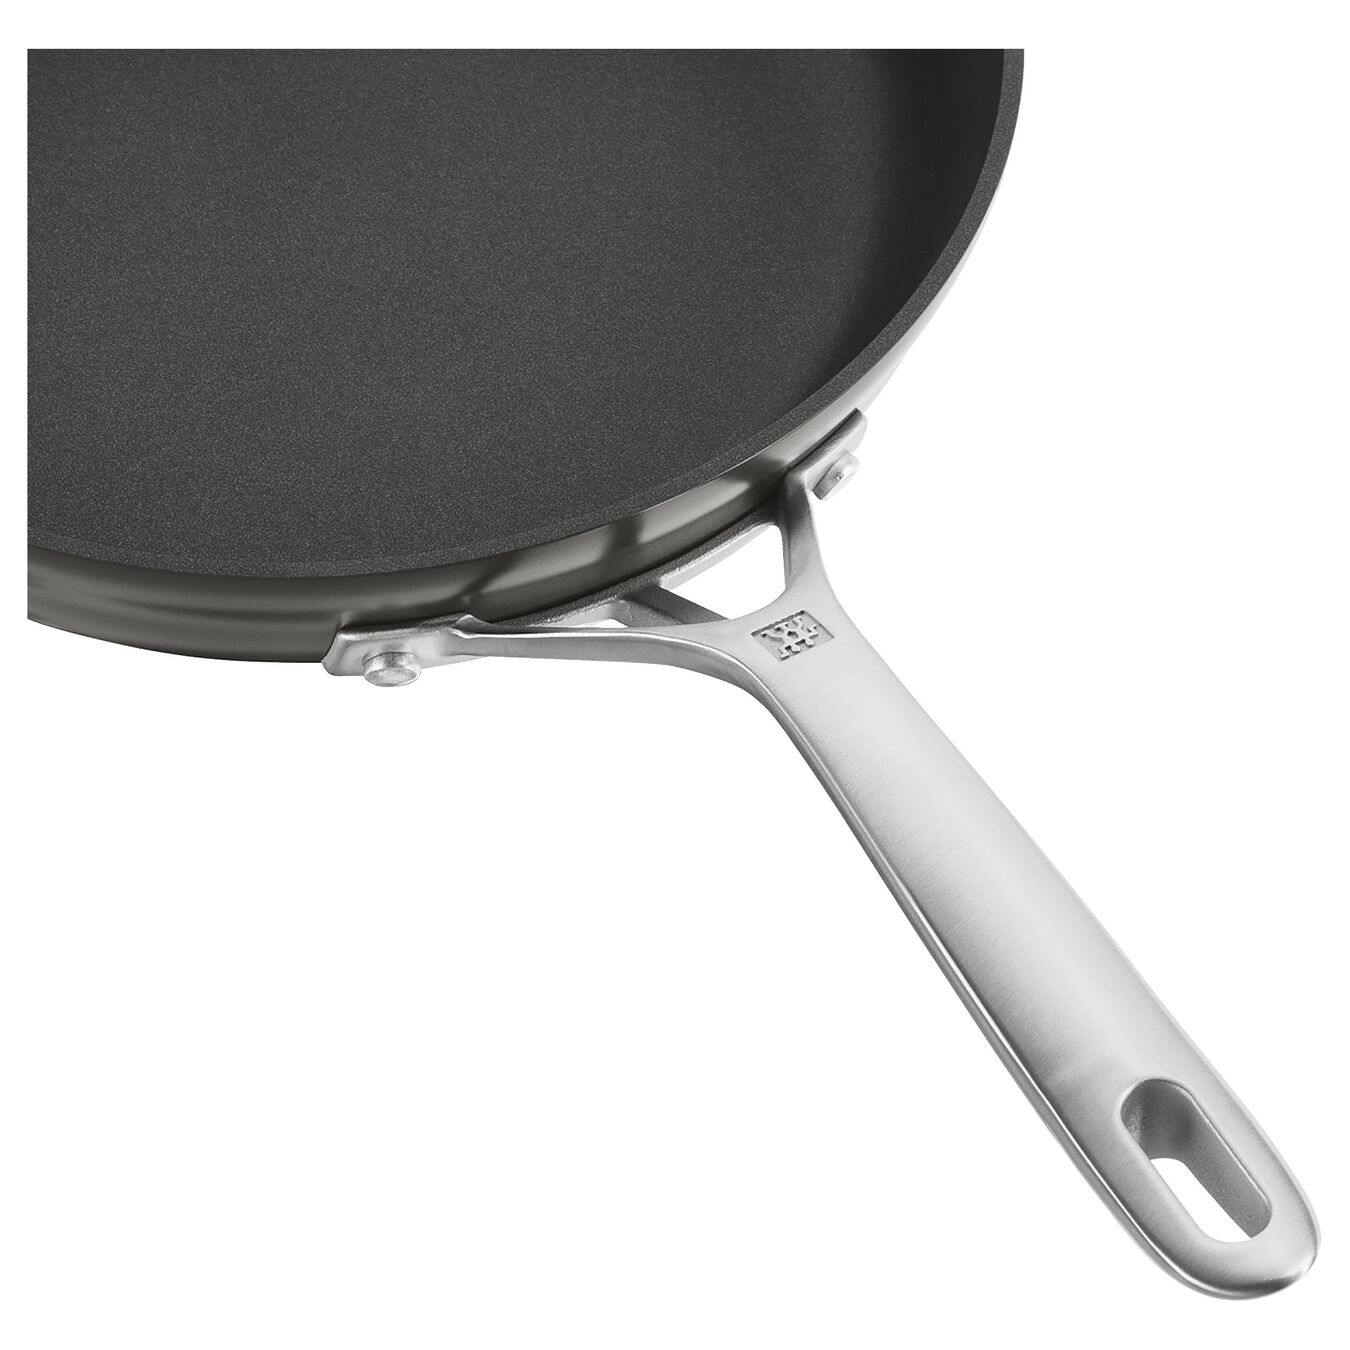 ZWILLING Motion Hard Anodized 12-inch Aluminum Nonstick Fry Pan